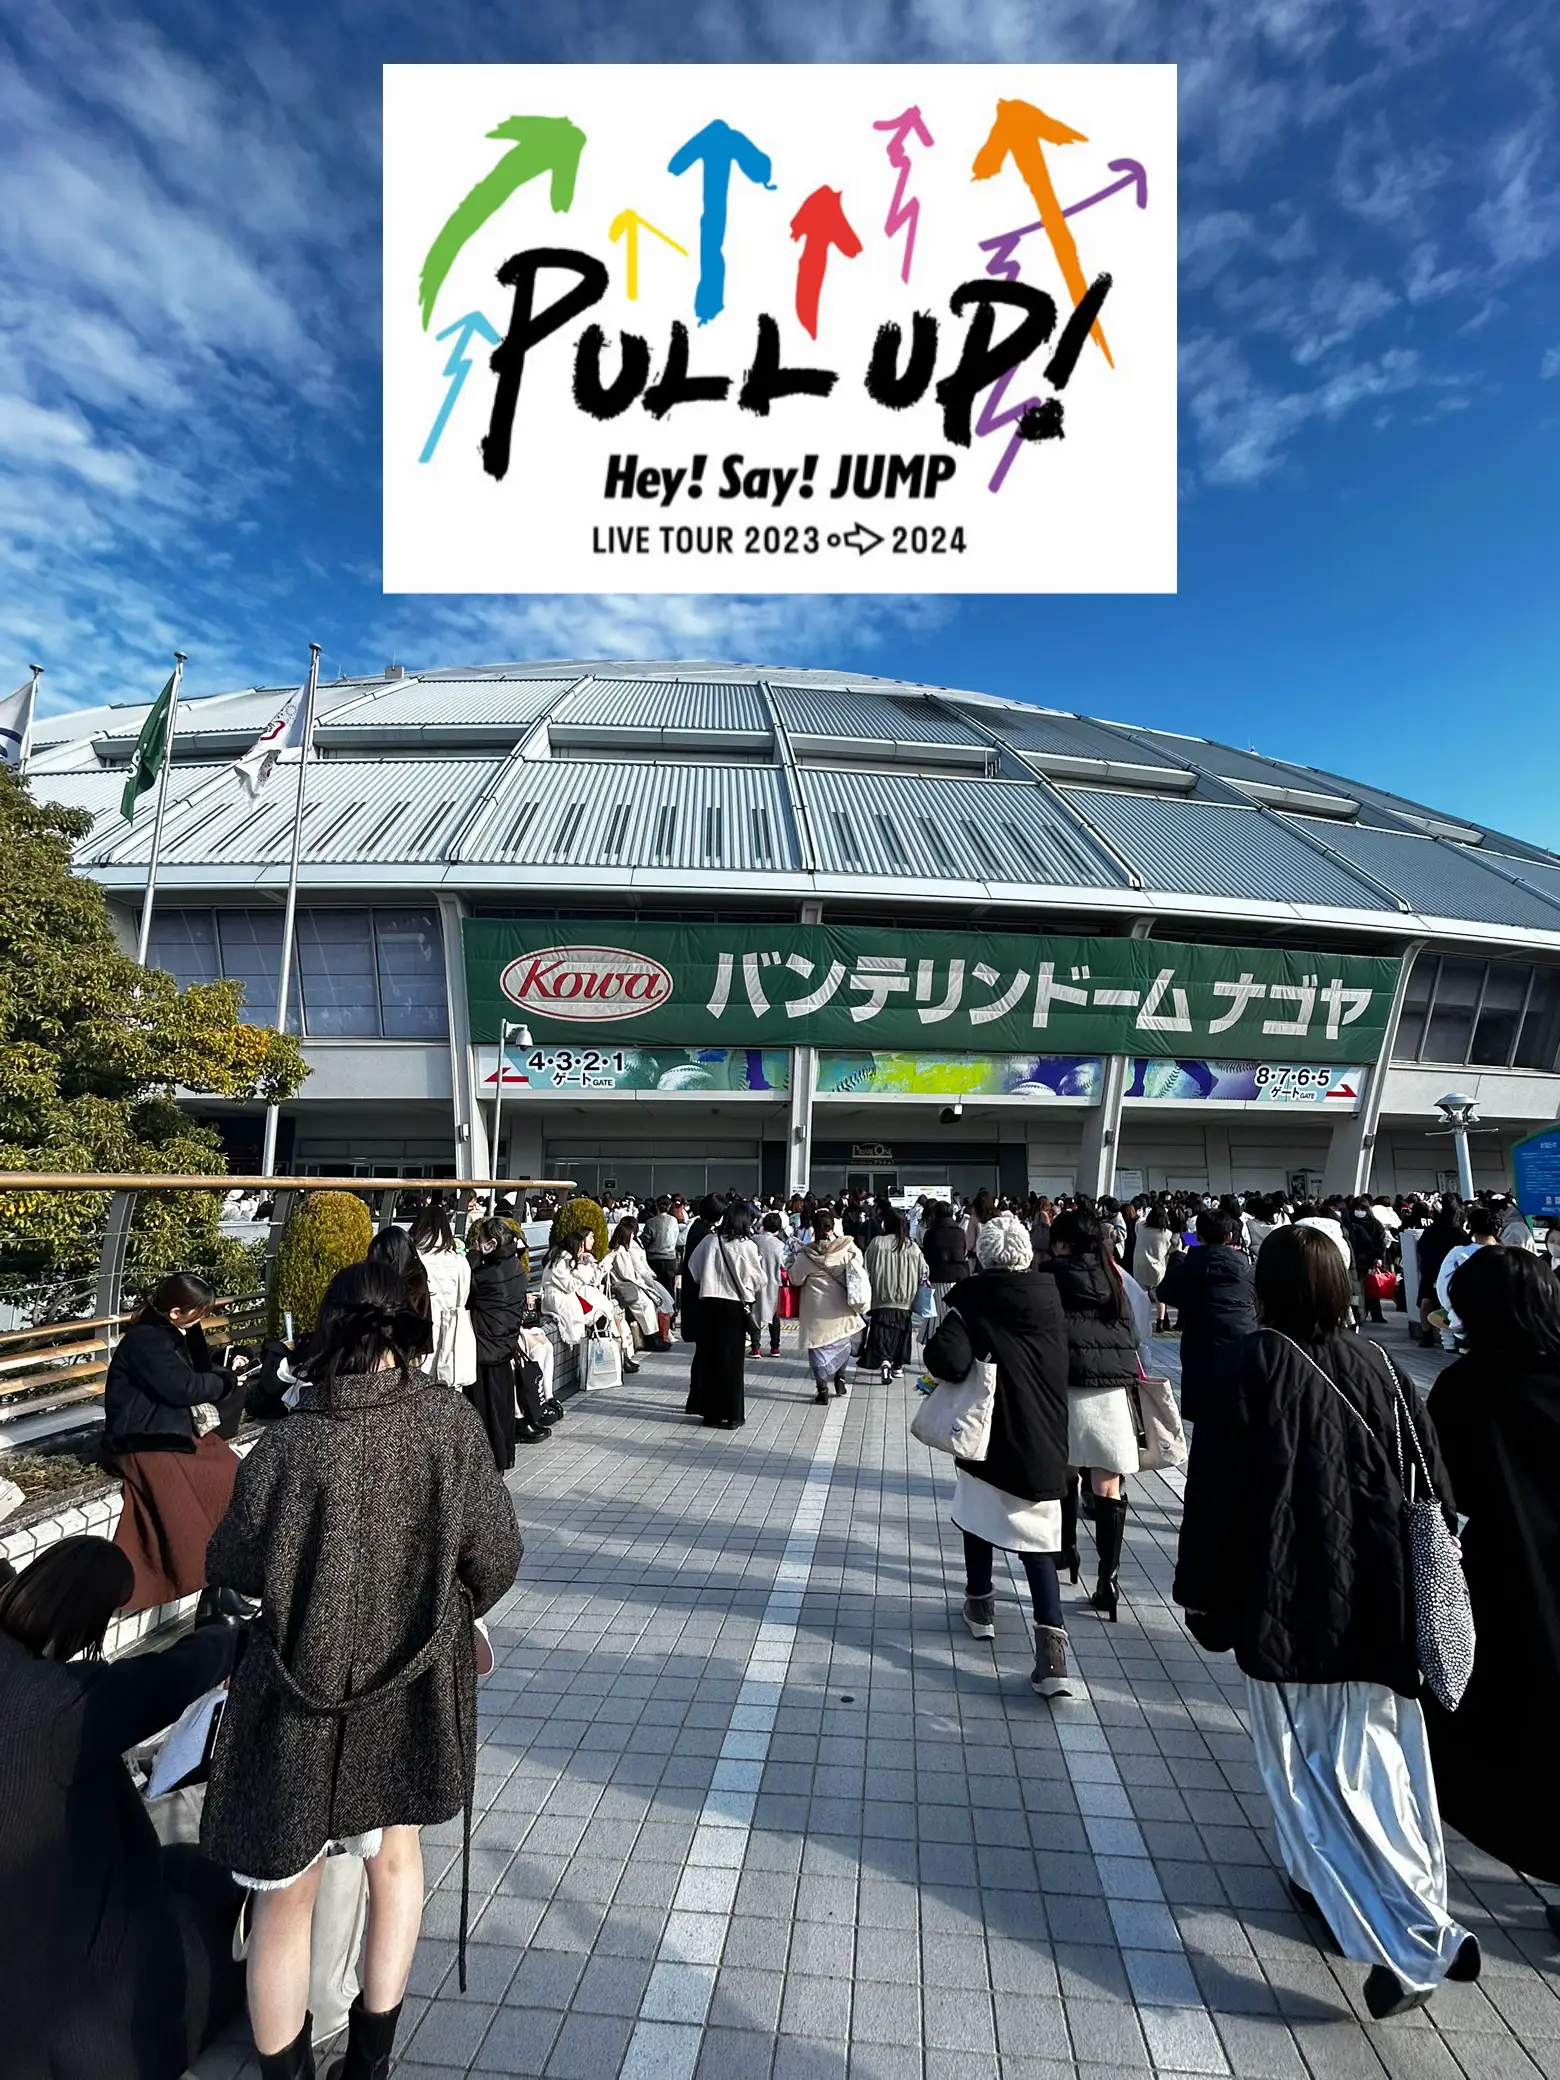 Hey!Say!JUMP LIVE TOUR 2023→2024 PULL UP⇪ | Gallery posted by